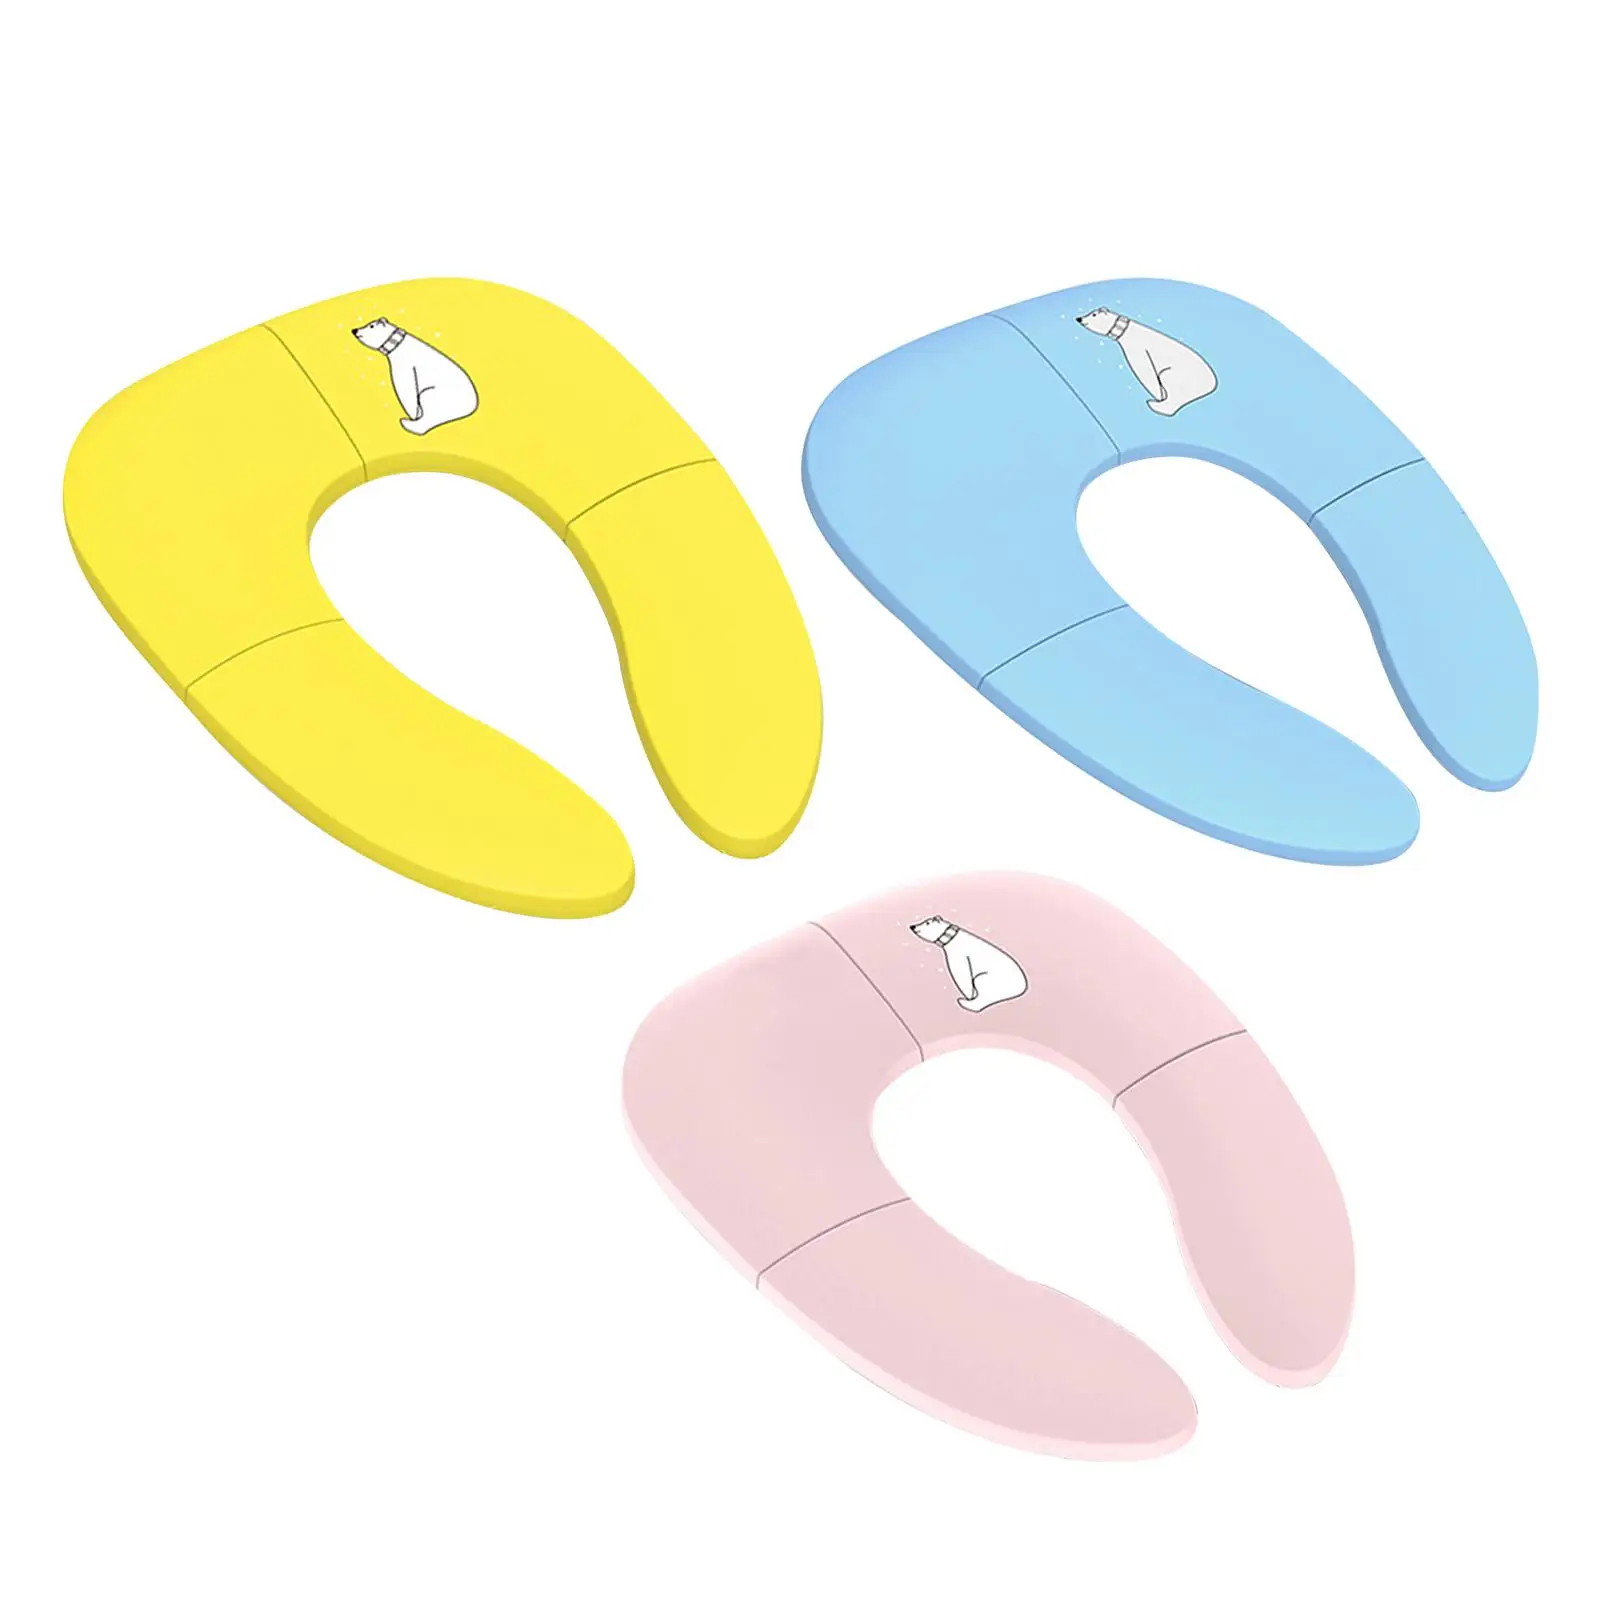 Foldable Toilet Cushion Reusable Potty Ring Portable Toilet Seat Toilet Cover Toilet Ring for Travel Toddler Baby Kids Adults